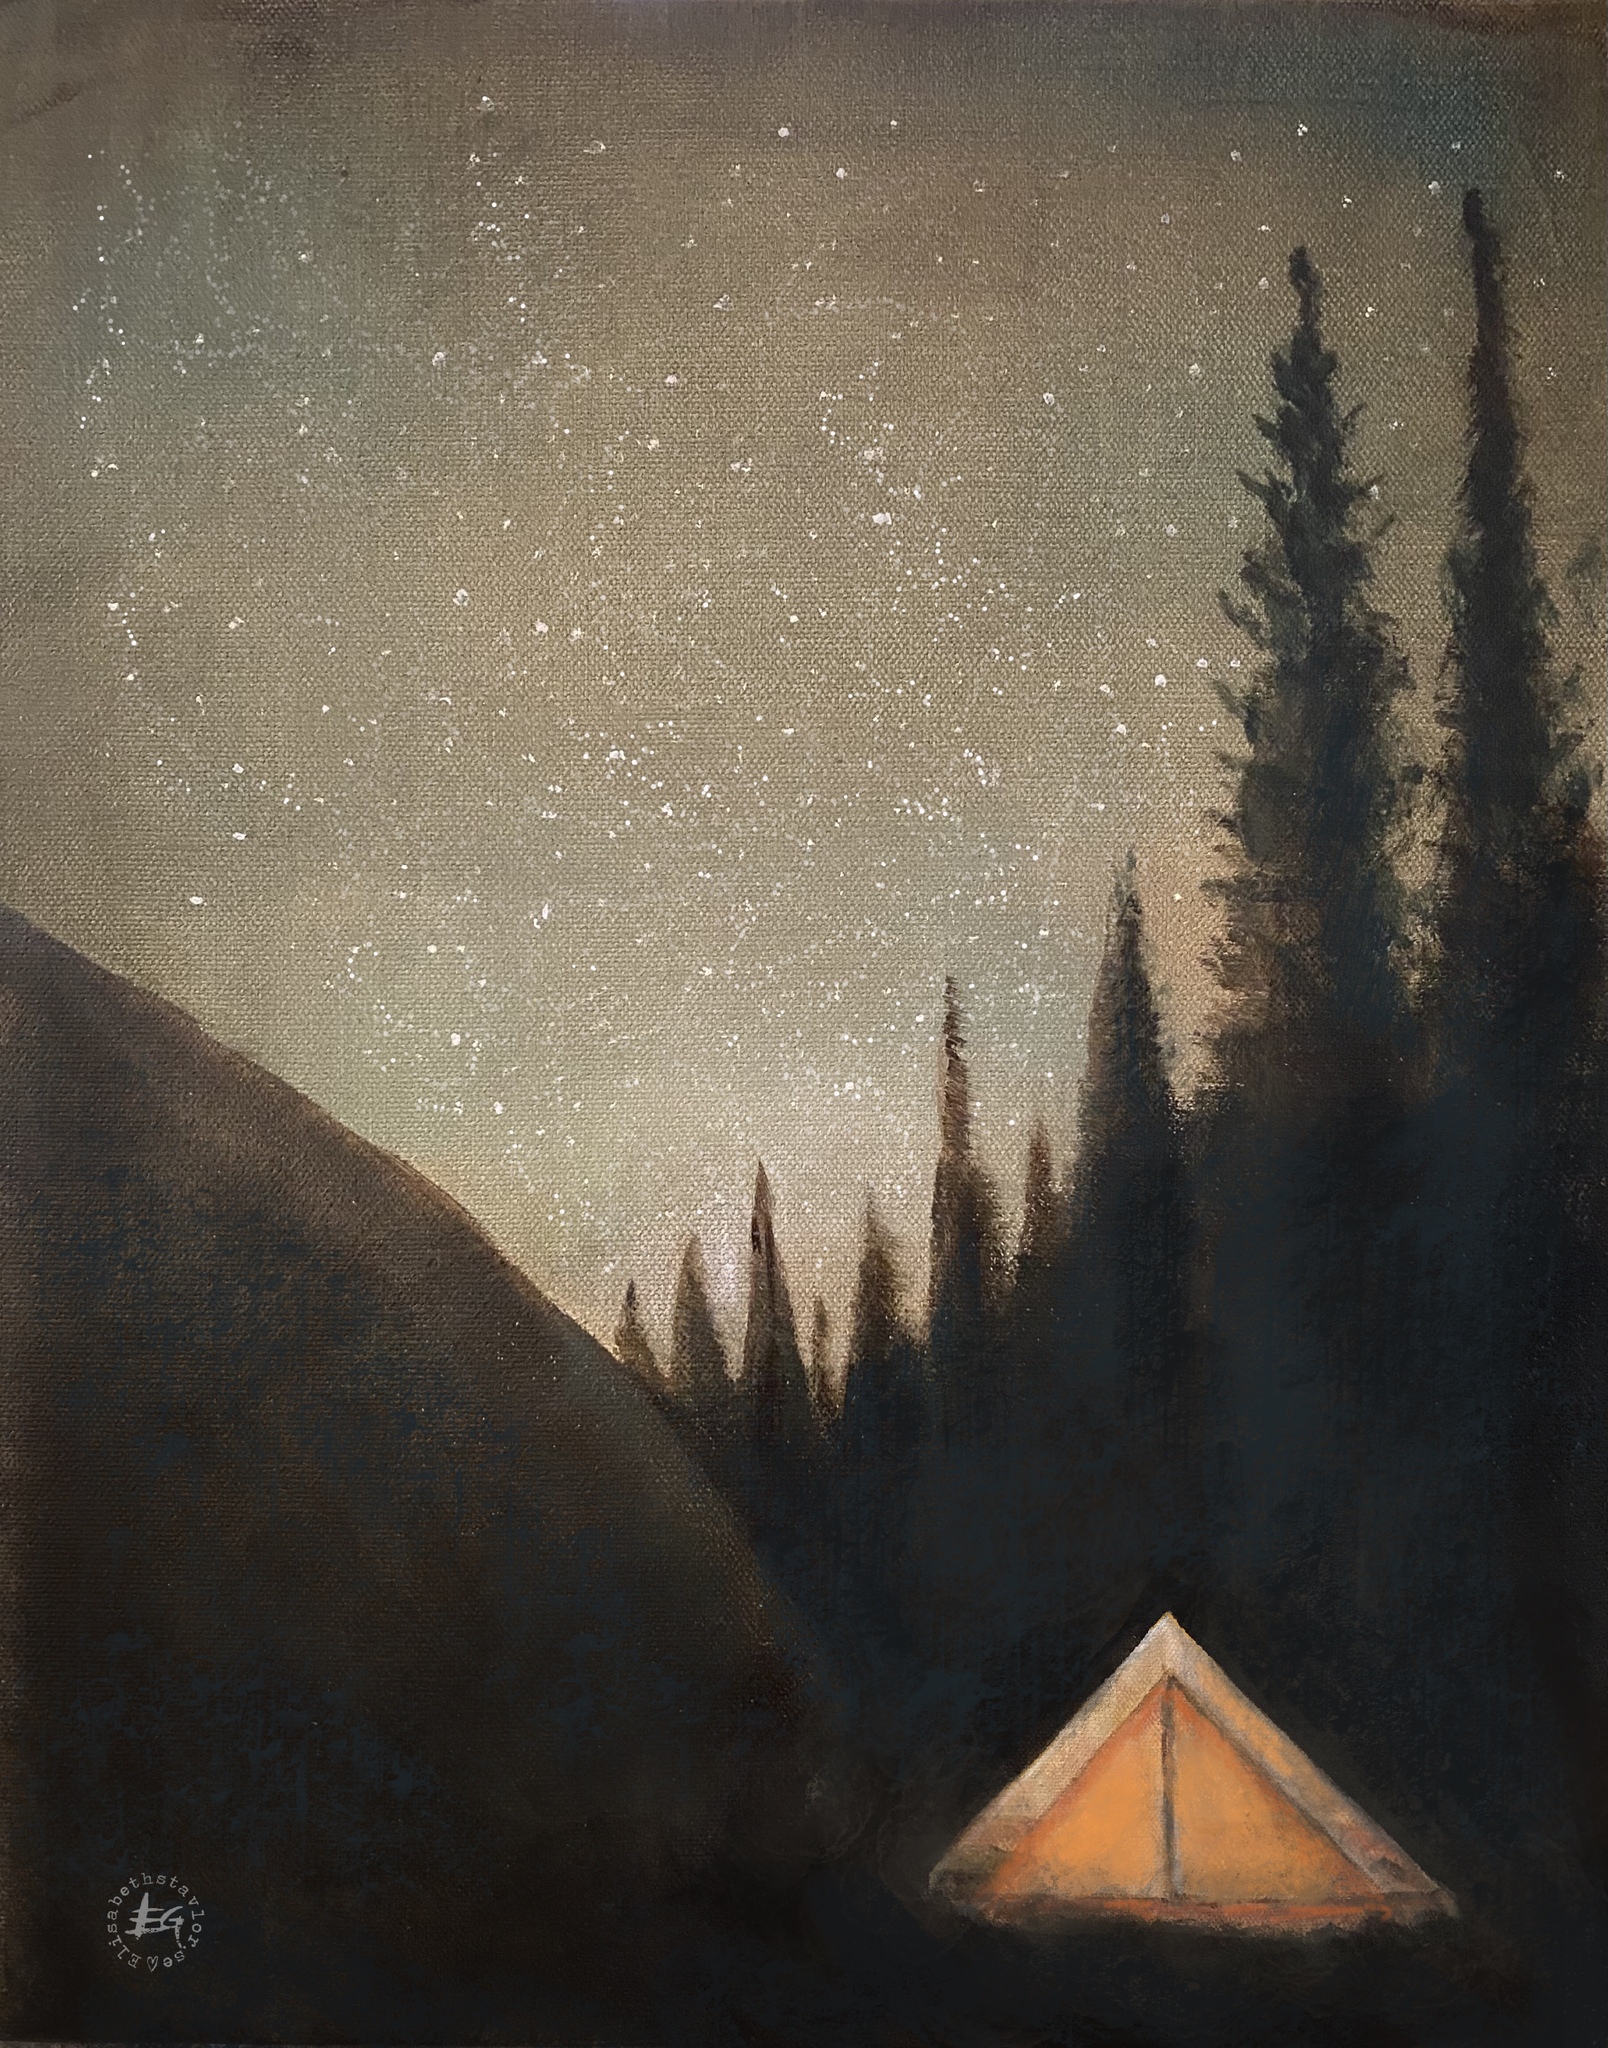 Camping with the stars